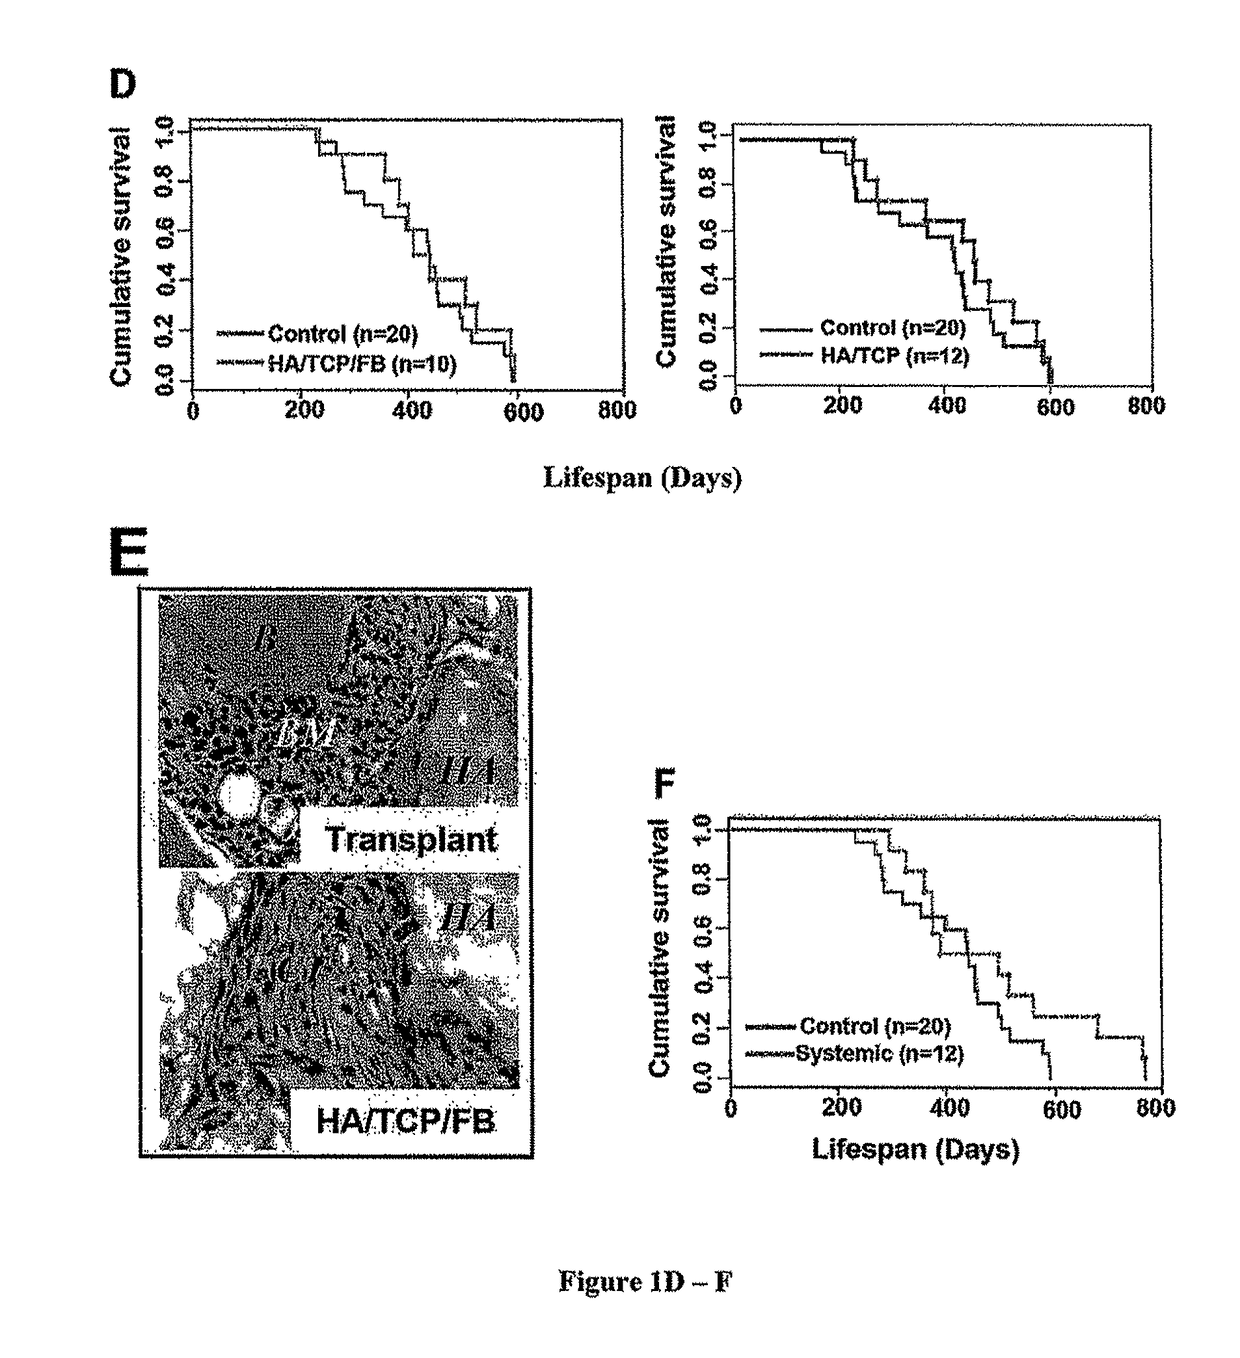 Method for treating an SLE-like autoimmune disease in a human subject consisting of administering stem cells from human exfoliated deciduous teeth (SHED) and erythropoietin (EPO) to said human subject